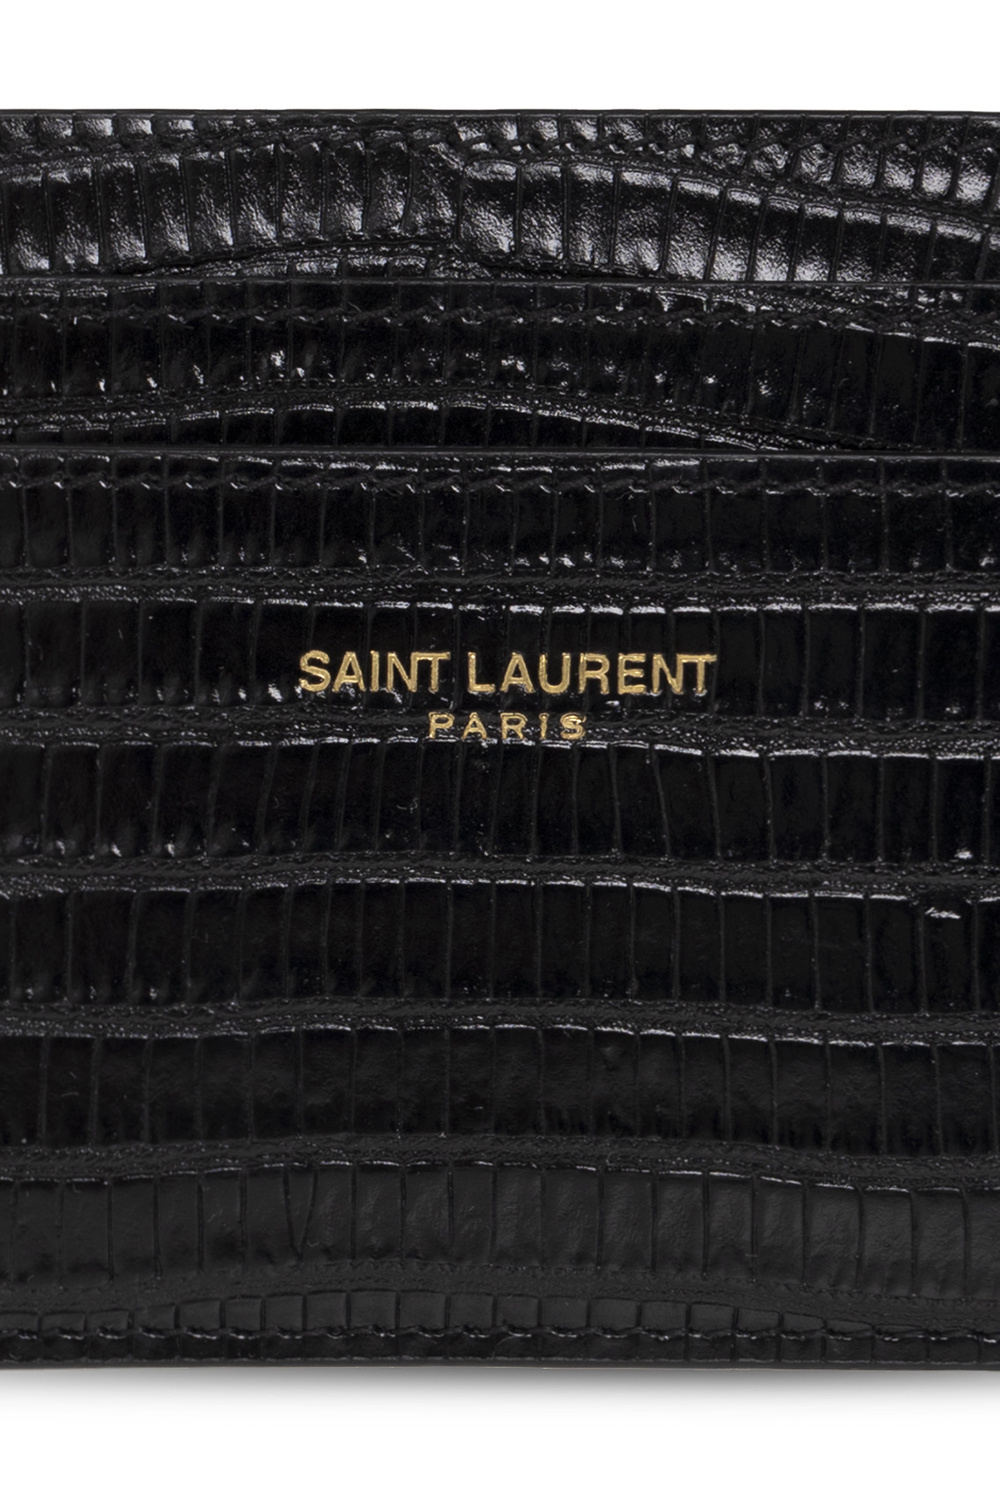 Saint Laurent Zoe Kravitz was recently snapped at a crosswalk in Soho carrying a quilted Saint Laurent Nikki Bag